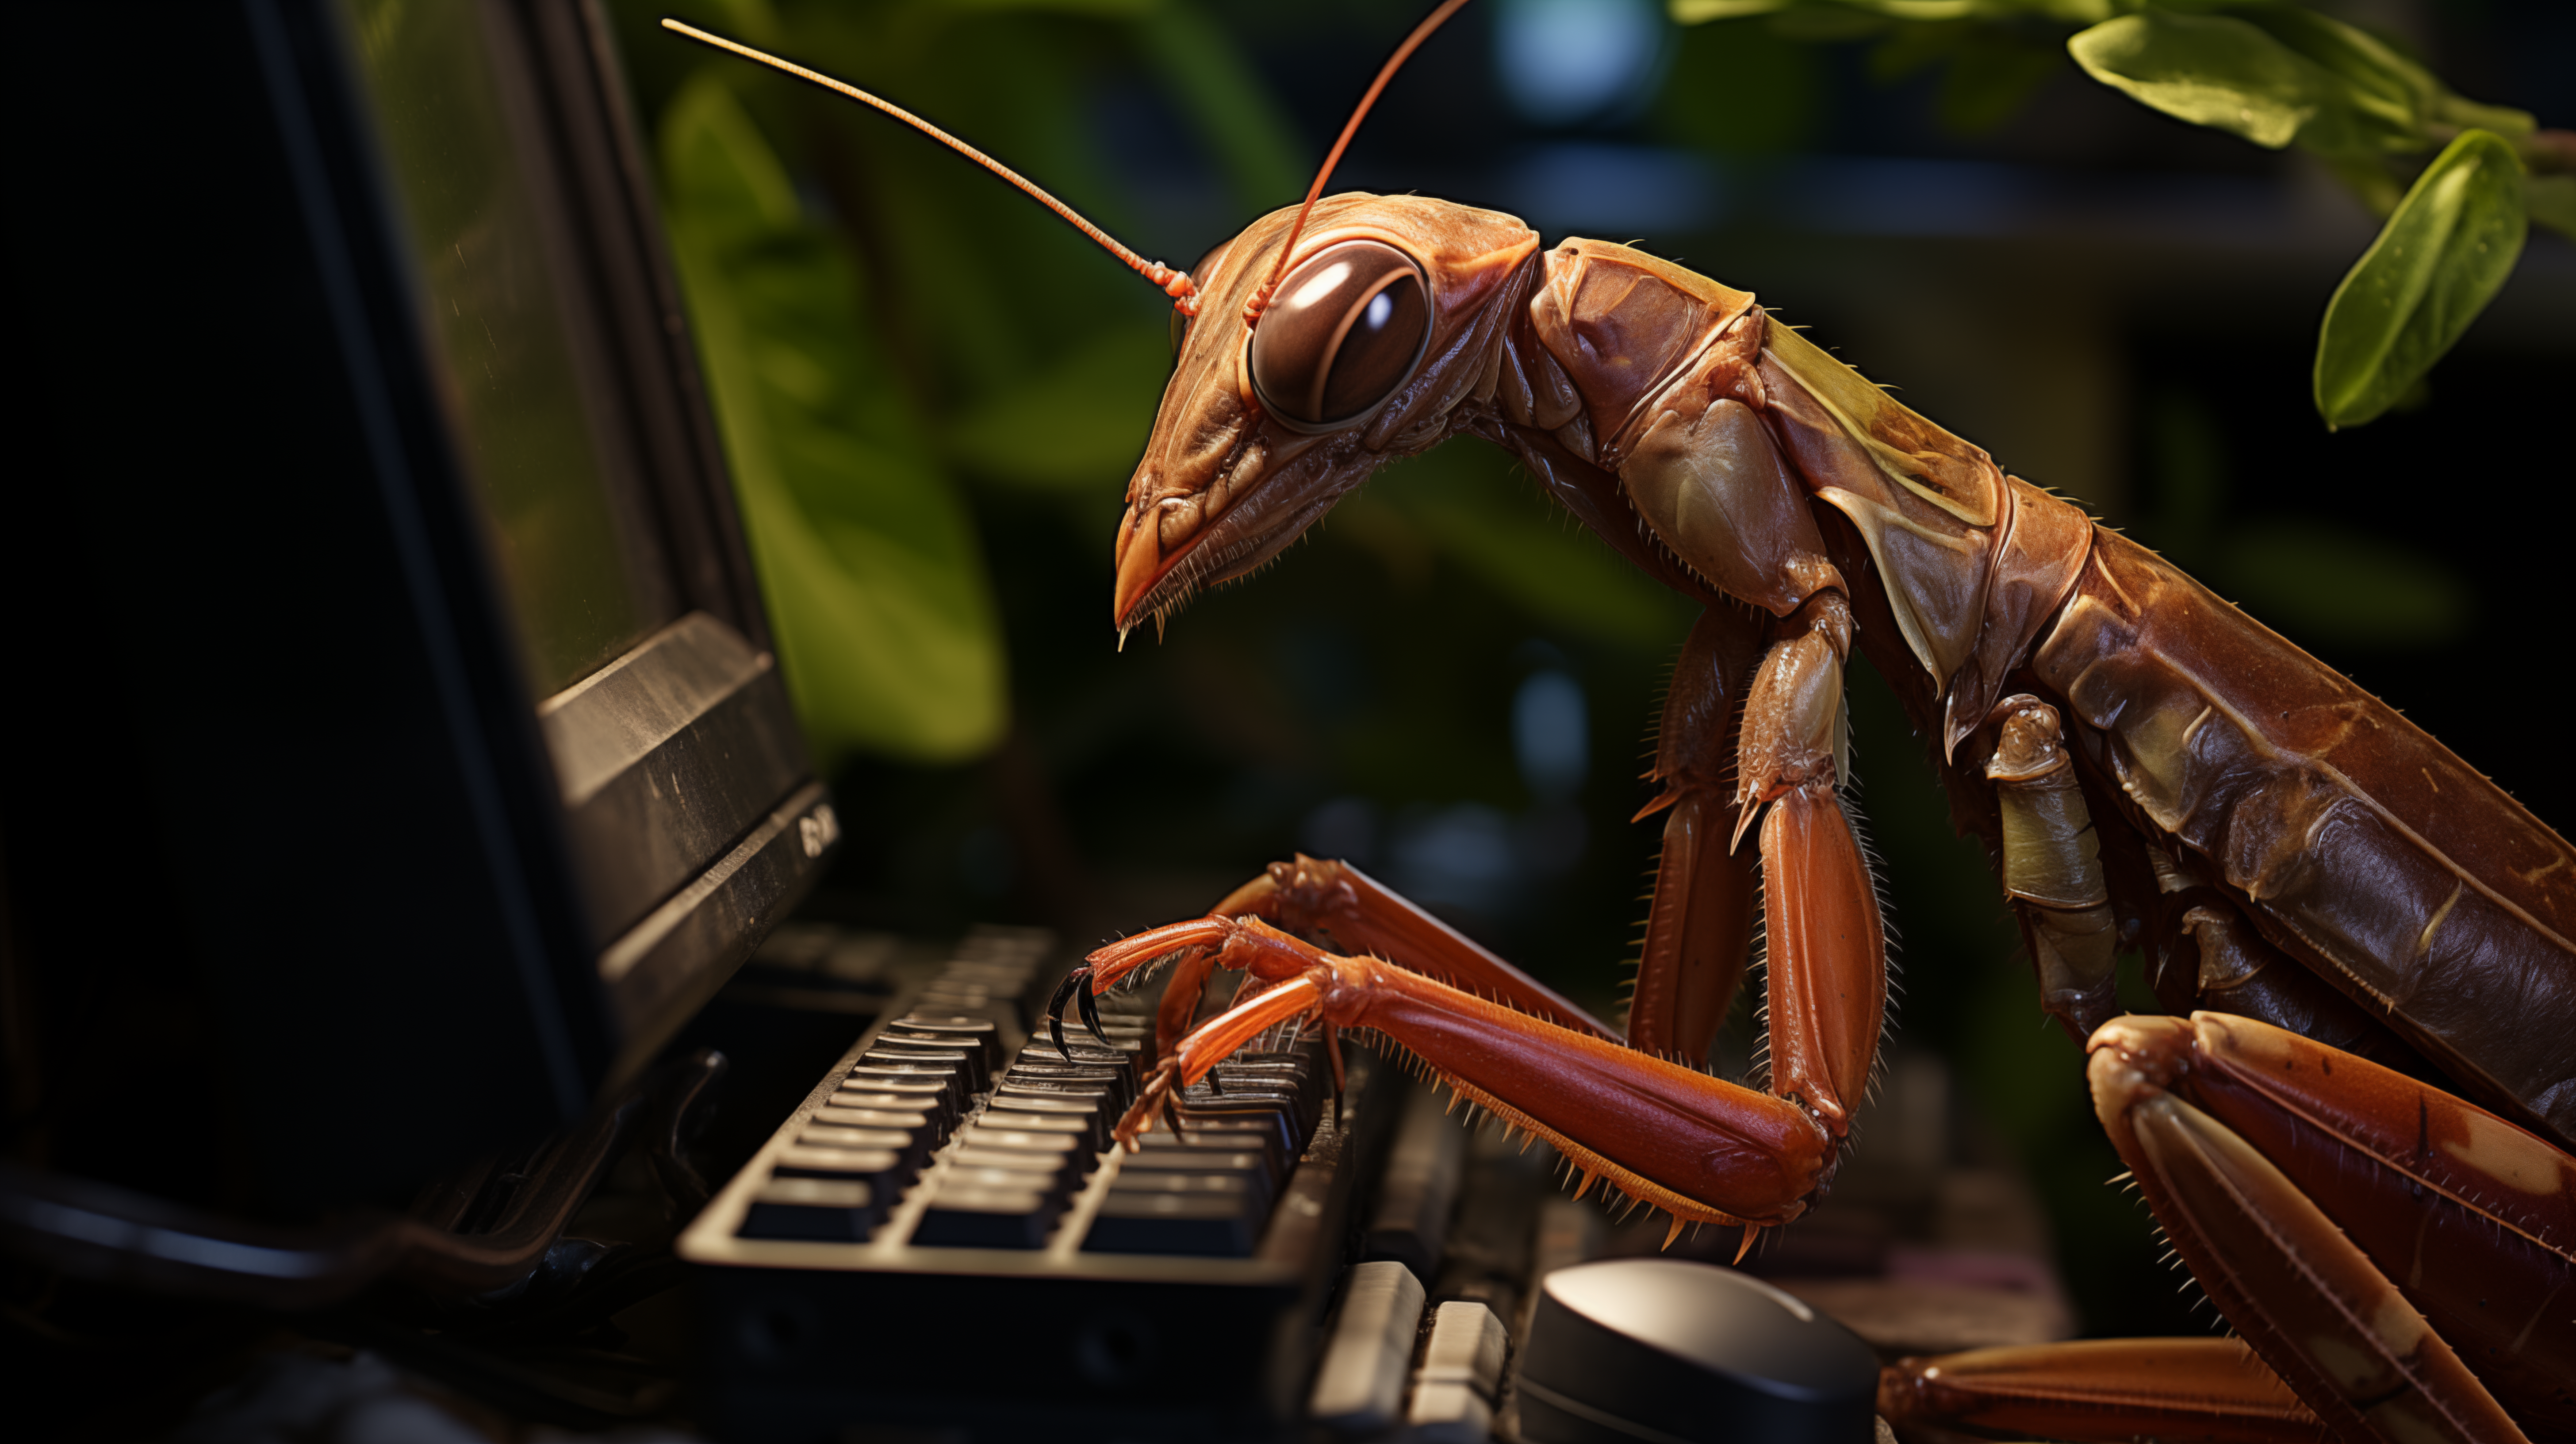 Humorous HD wallpaper featuring a praying mantis appearing to work on a computer keyboard, ideal for desktop background with a comical touch.